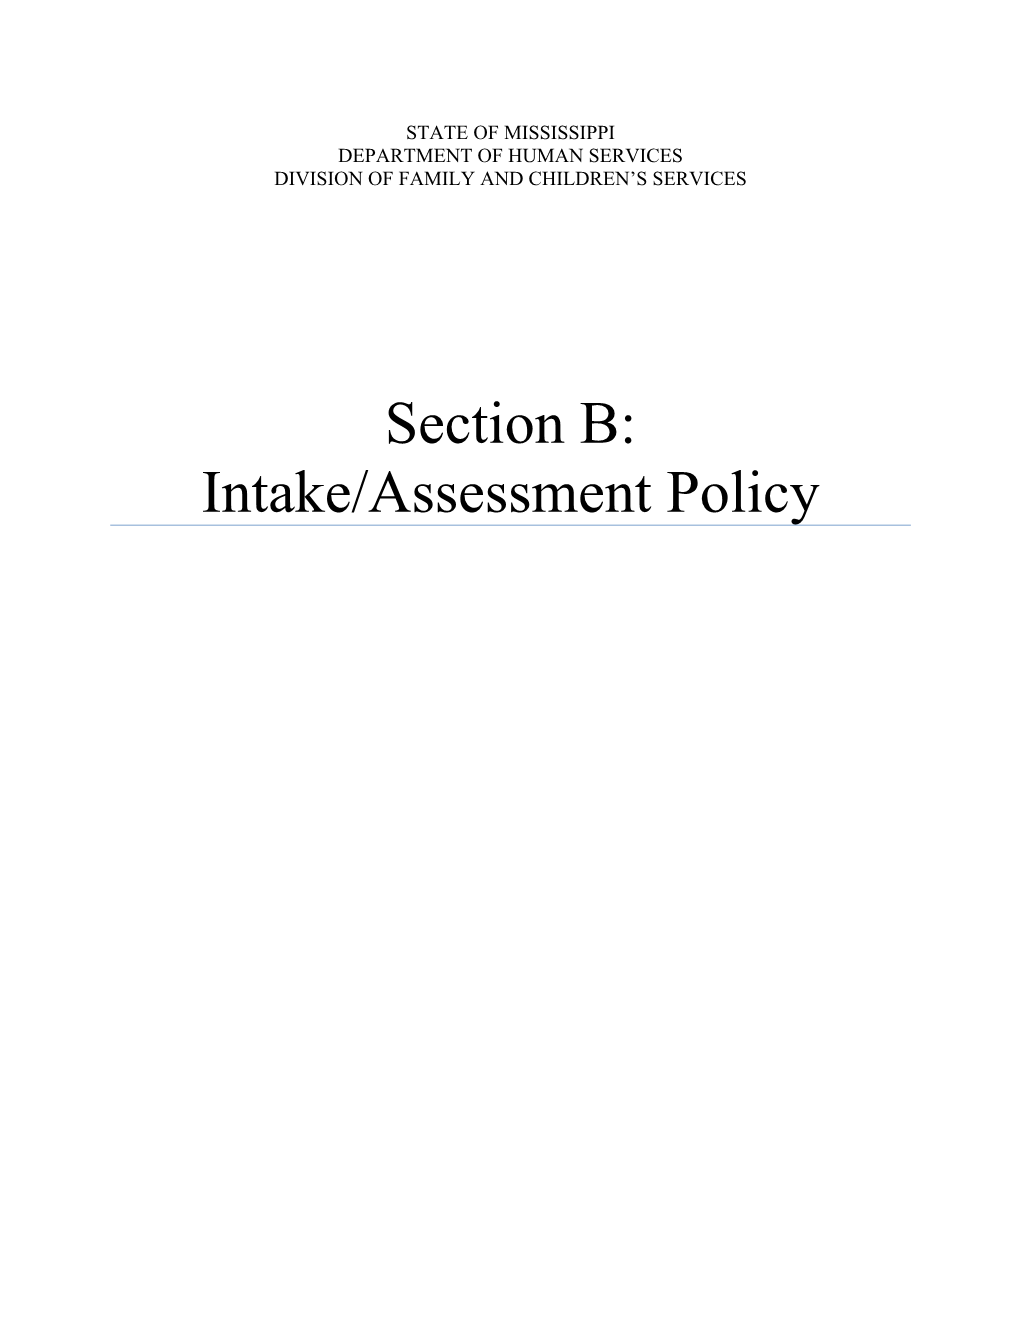 Intake/Assessment Policy